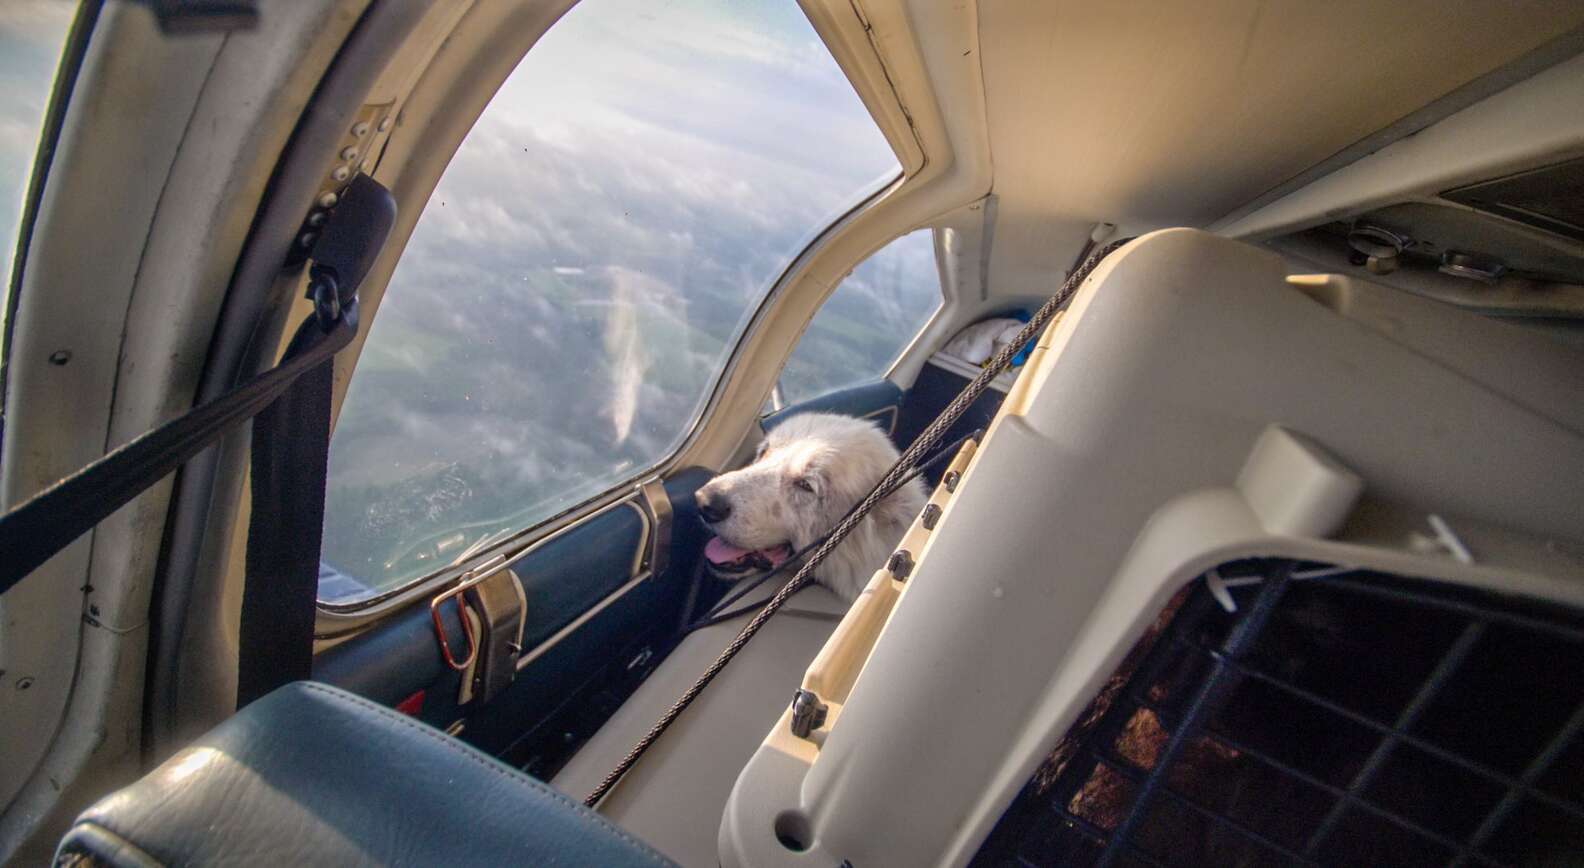 Excited Shelter Dog Can't Sit Still On His Flight To Freedom - The Dodo